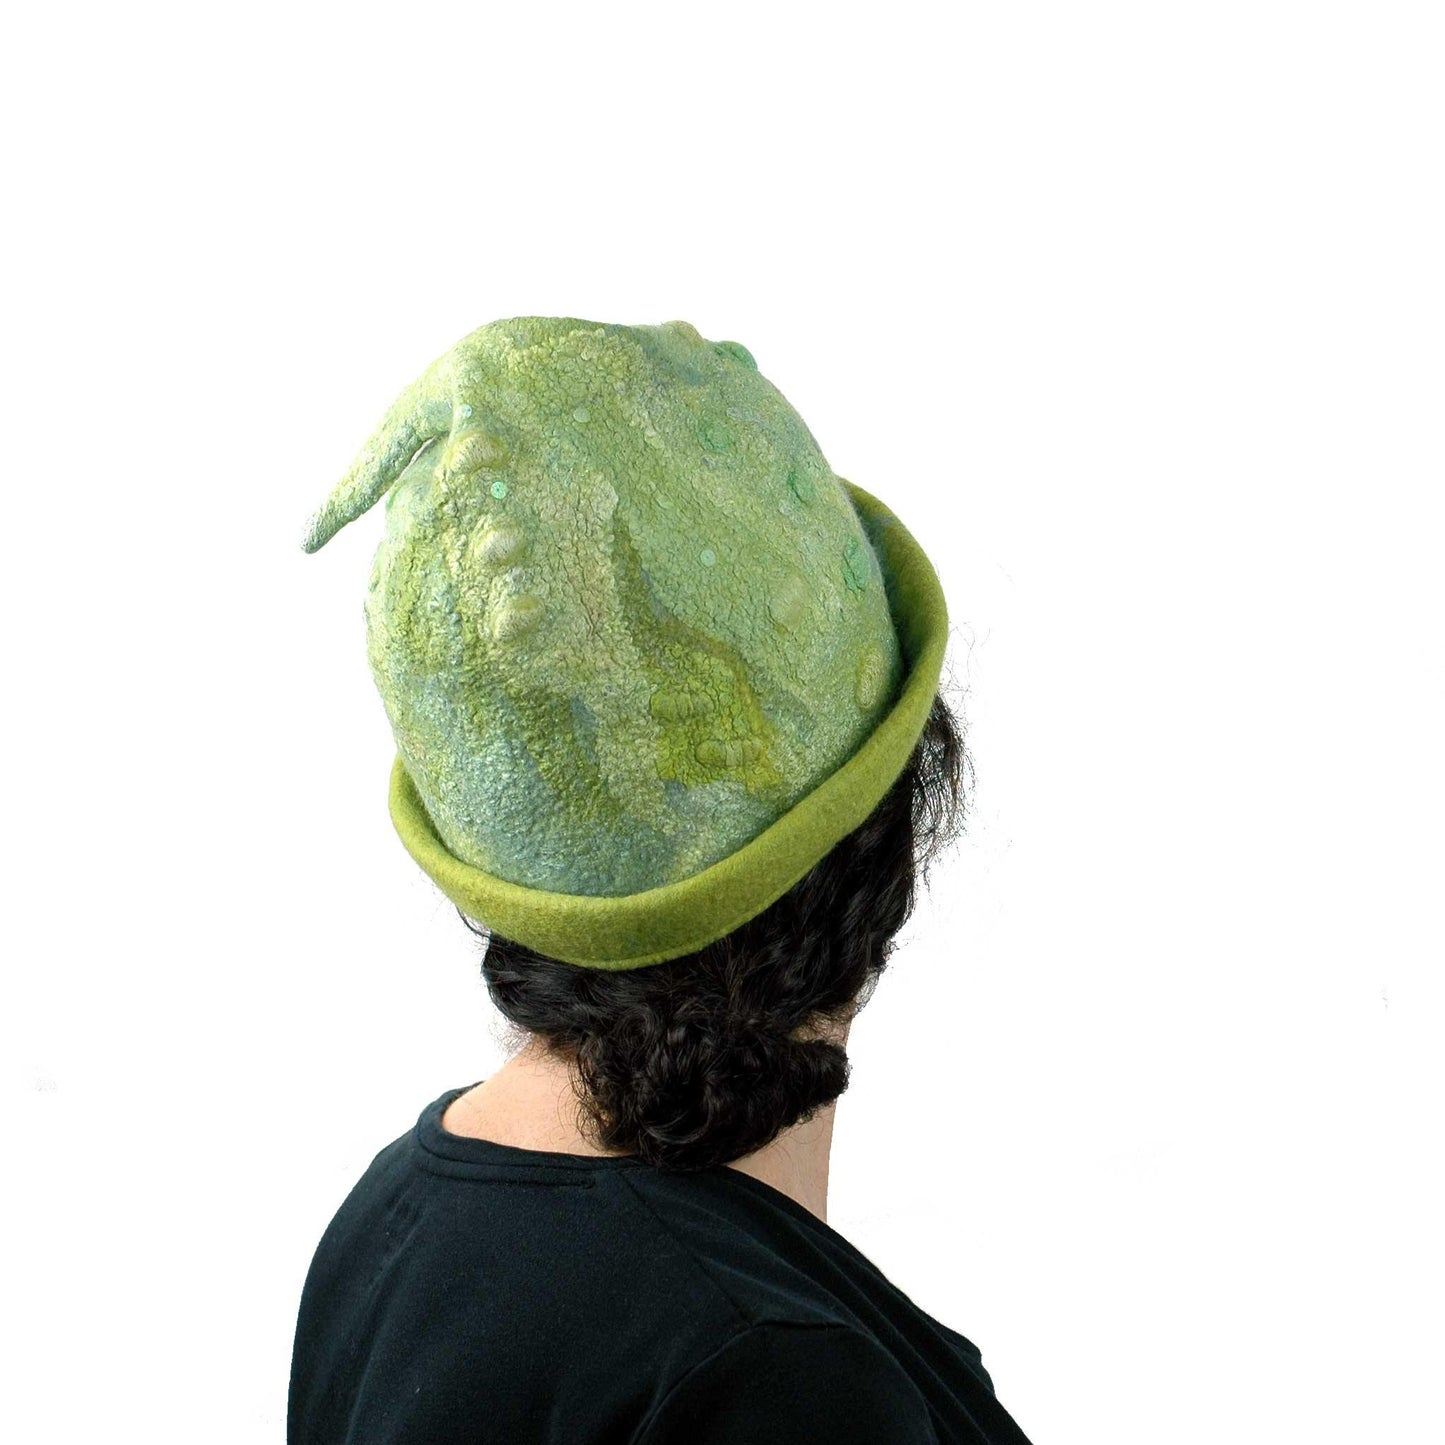 Shades of Green Beanie Hat with Playful Fish Tail - Medium Size - back view